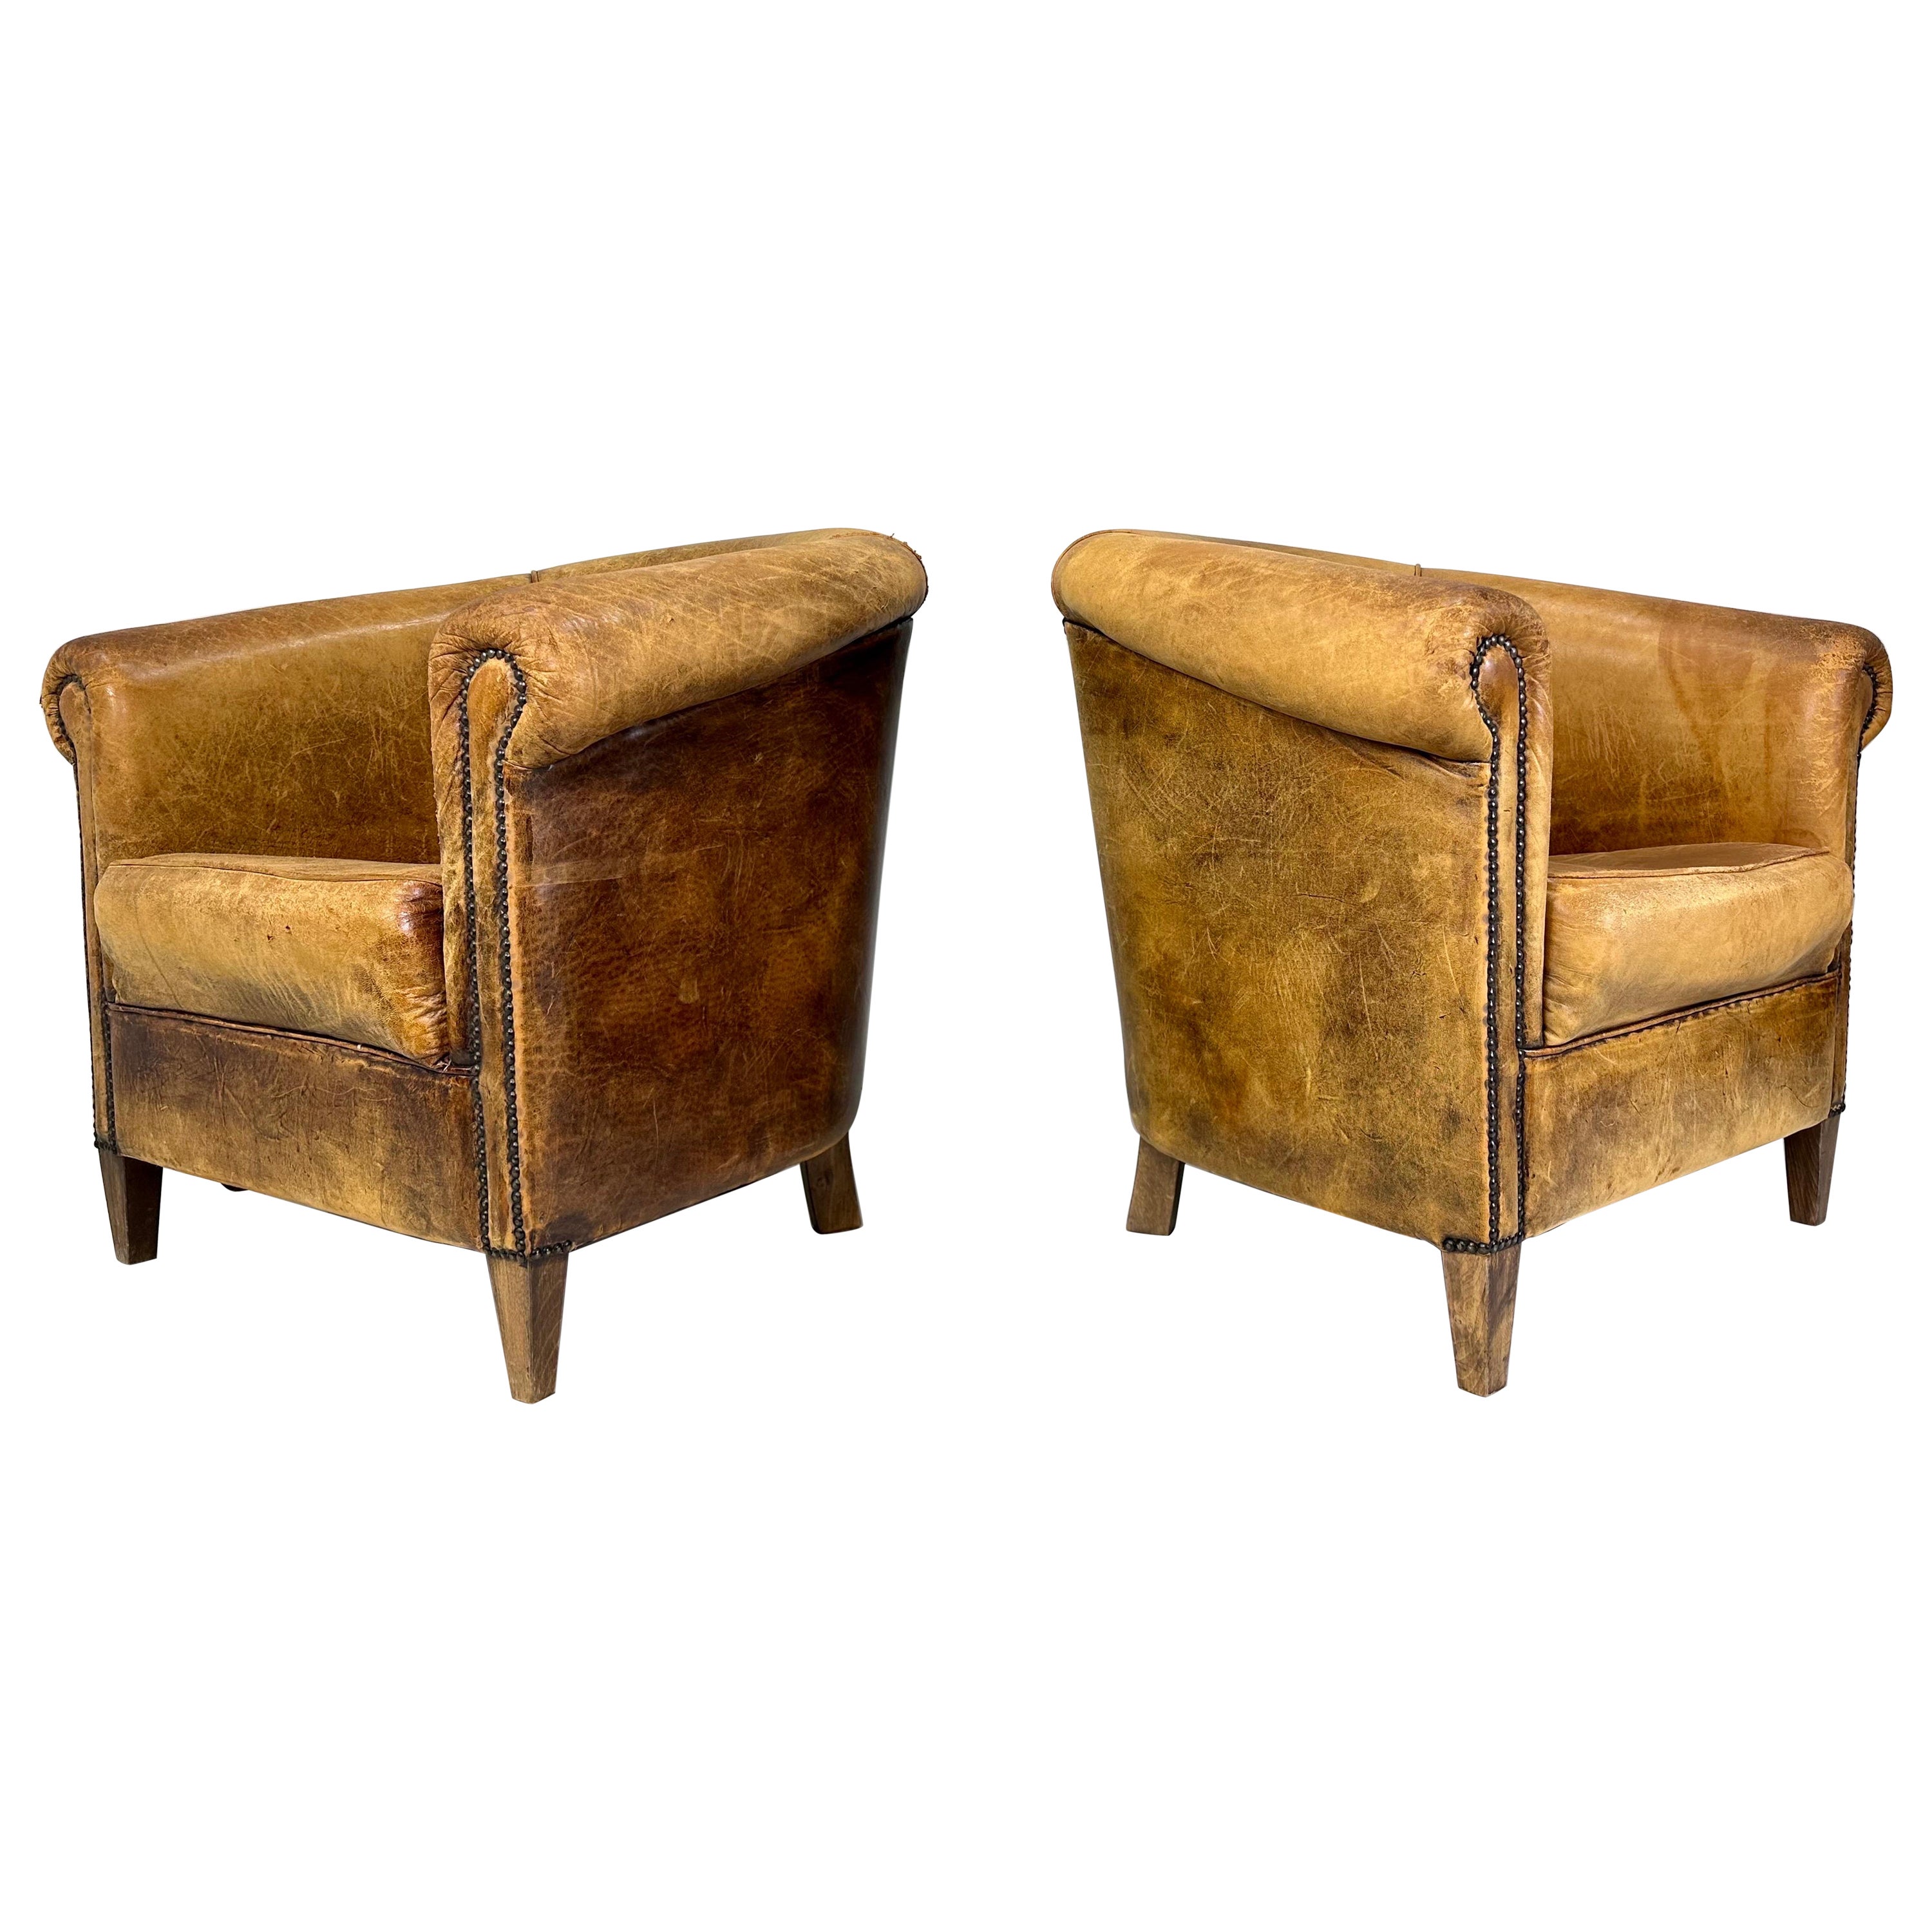 Early 20th Century European Leather Club Chairs For Sale